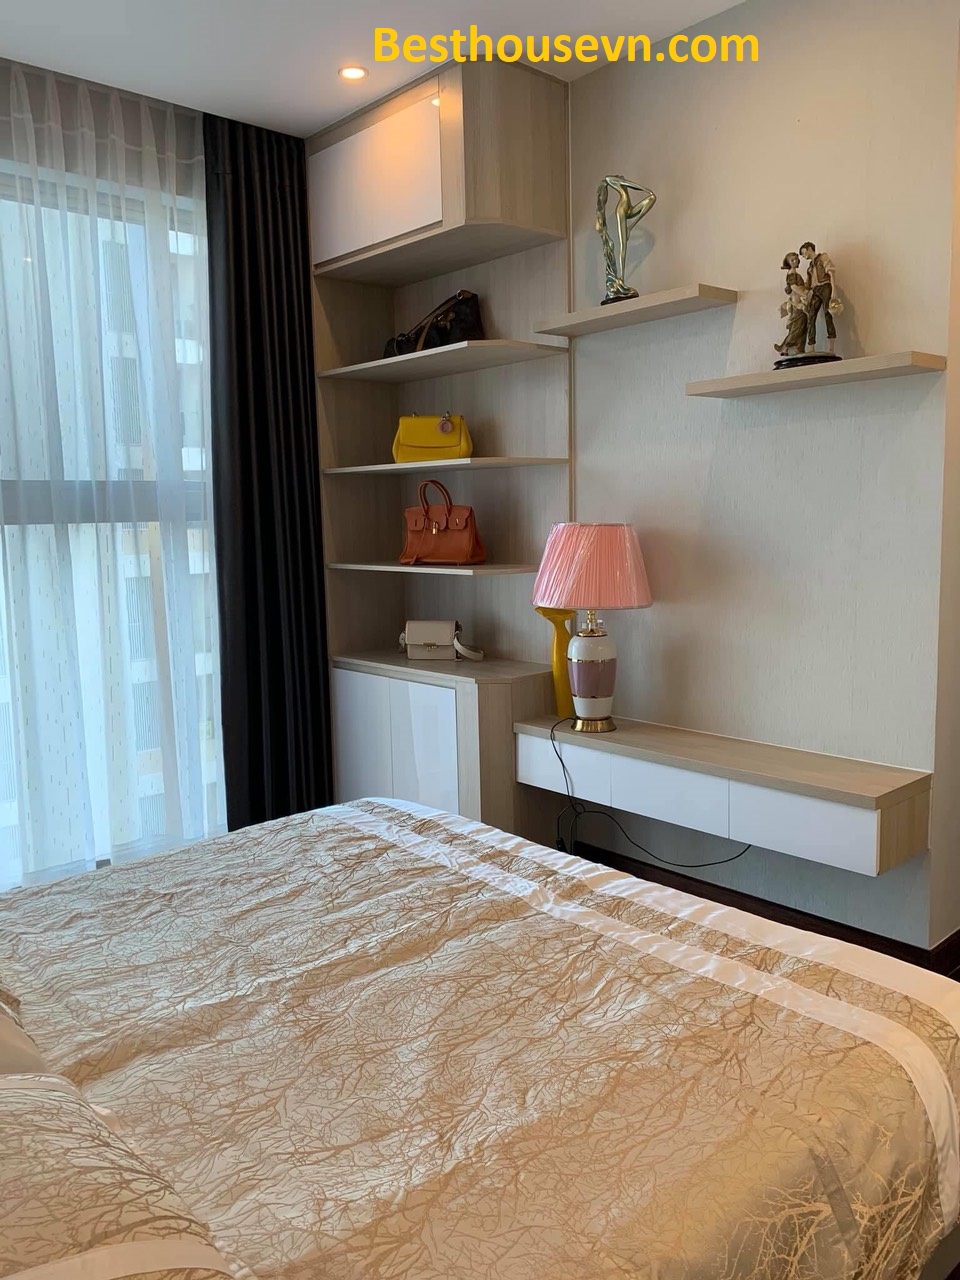 Mitown-89sqm-apartment-for-rent-in-phu-my-hung-district-7-hcmc-vn